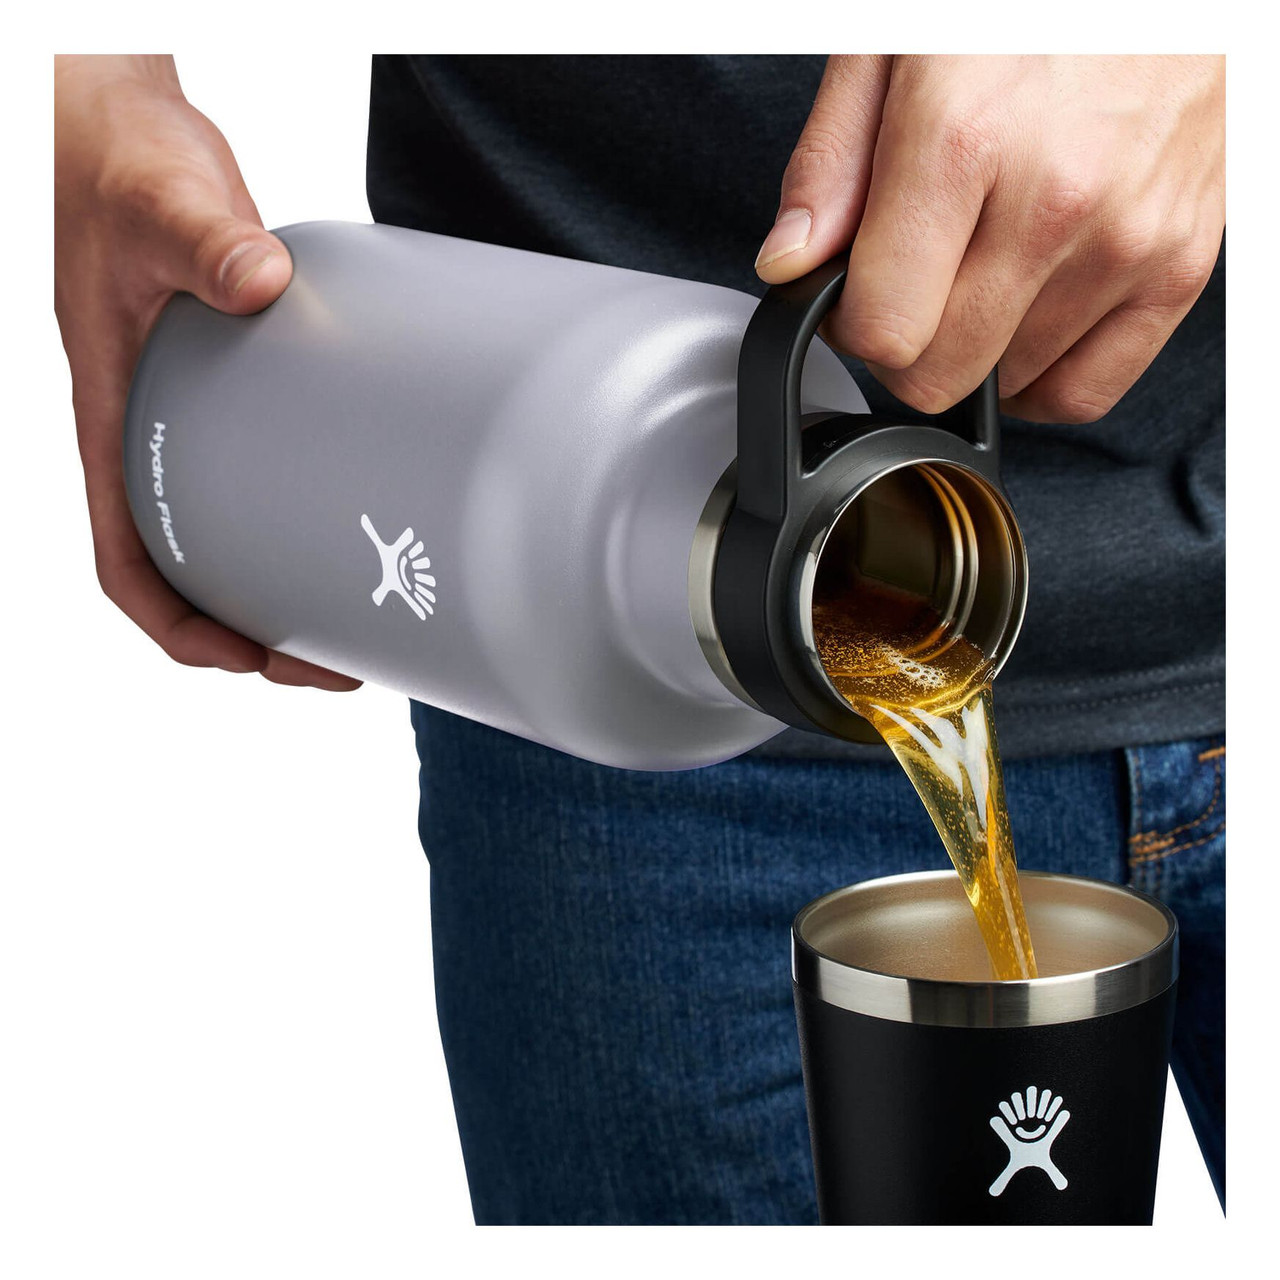 https://cdn11.bigcommerce.com/s-98f3d/images/stencil/1280x1280/products/1448/30665/Hydro_Flask_Insulated_Beer_Growler_birch-feature-pour-2__73534.1694649435.jpg?c=2